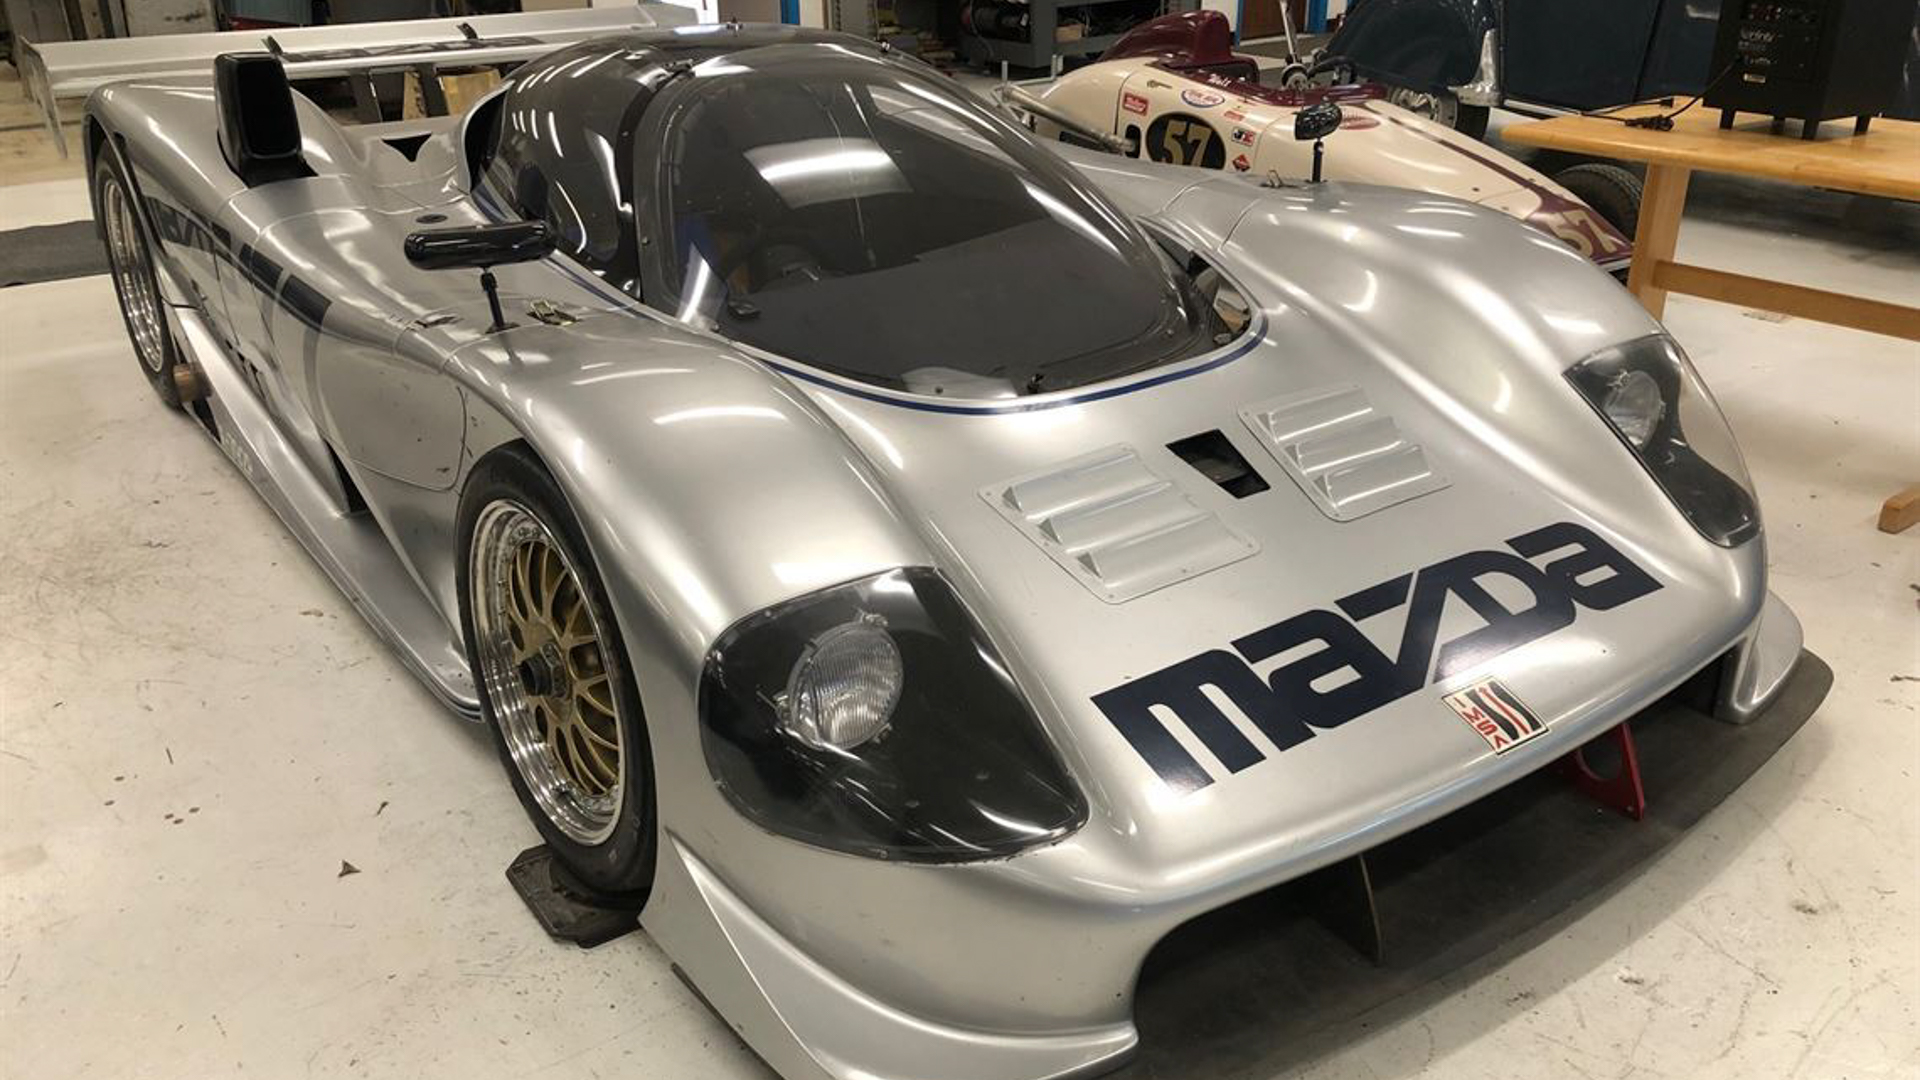 This Four-Rotor 1992 Mazda RX-792P IMSA Racer Can Be Yours for $1.5M